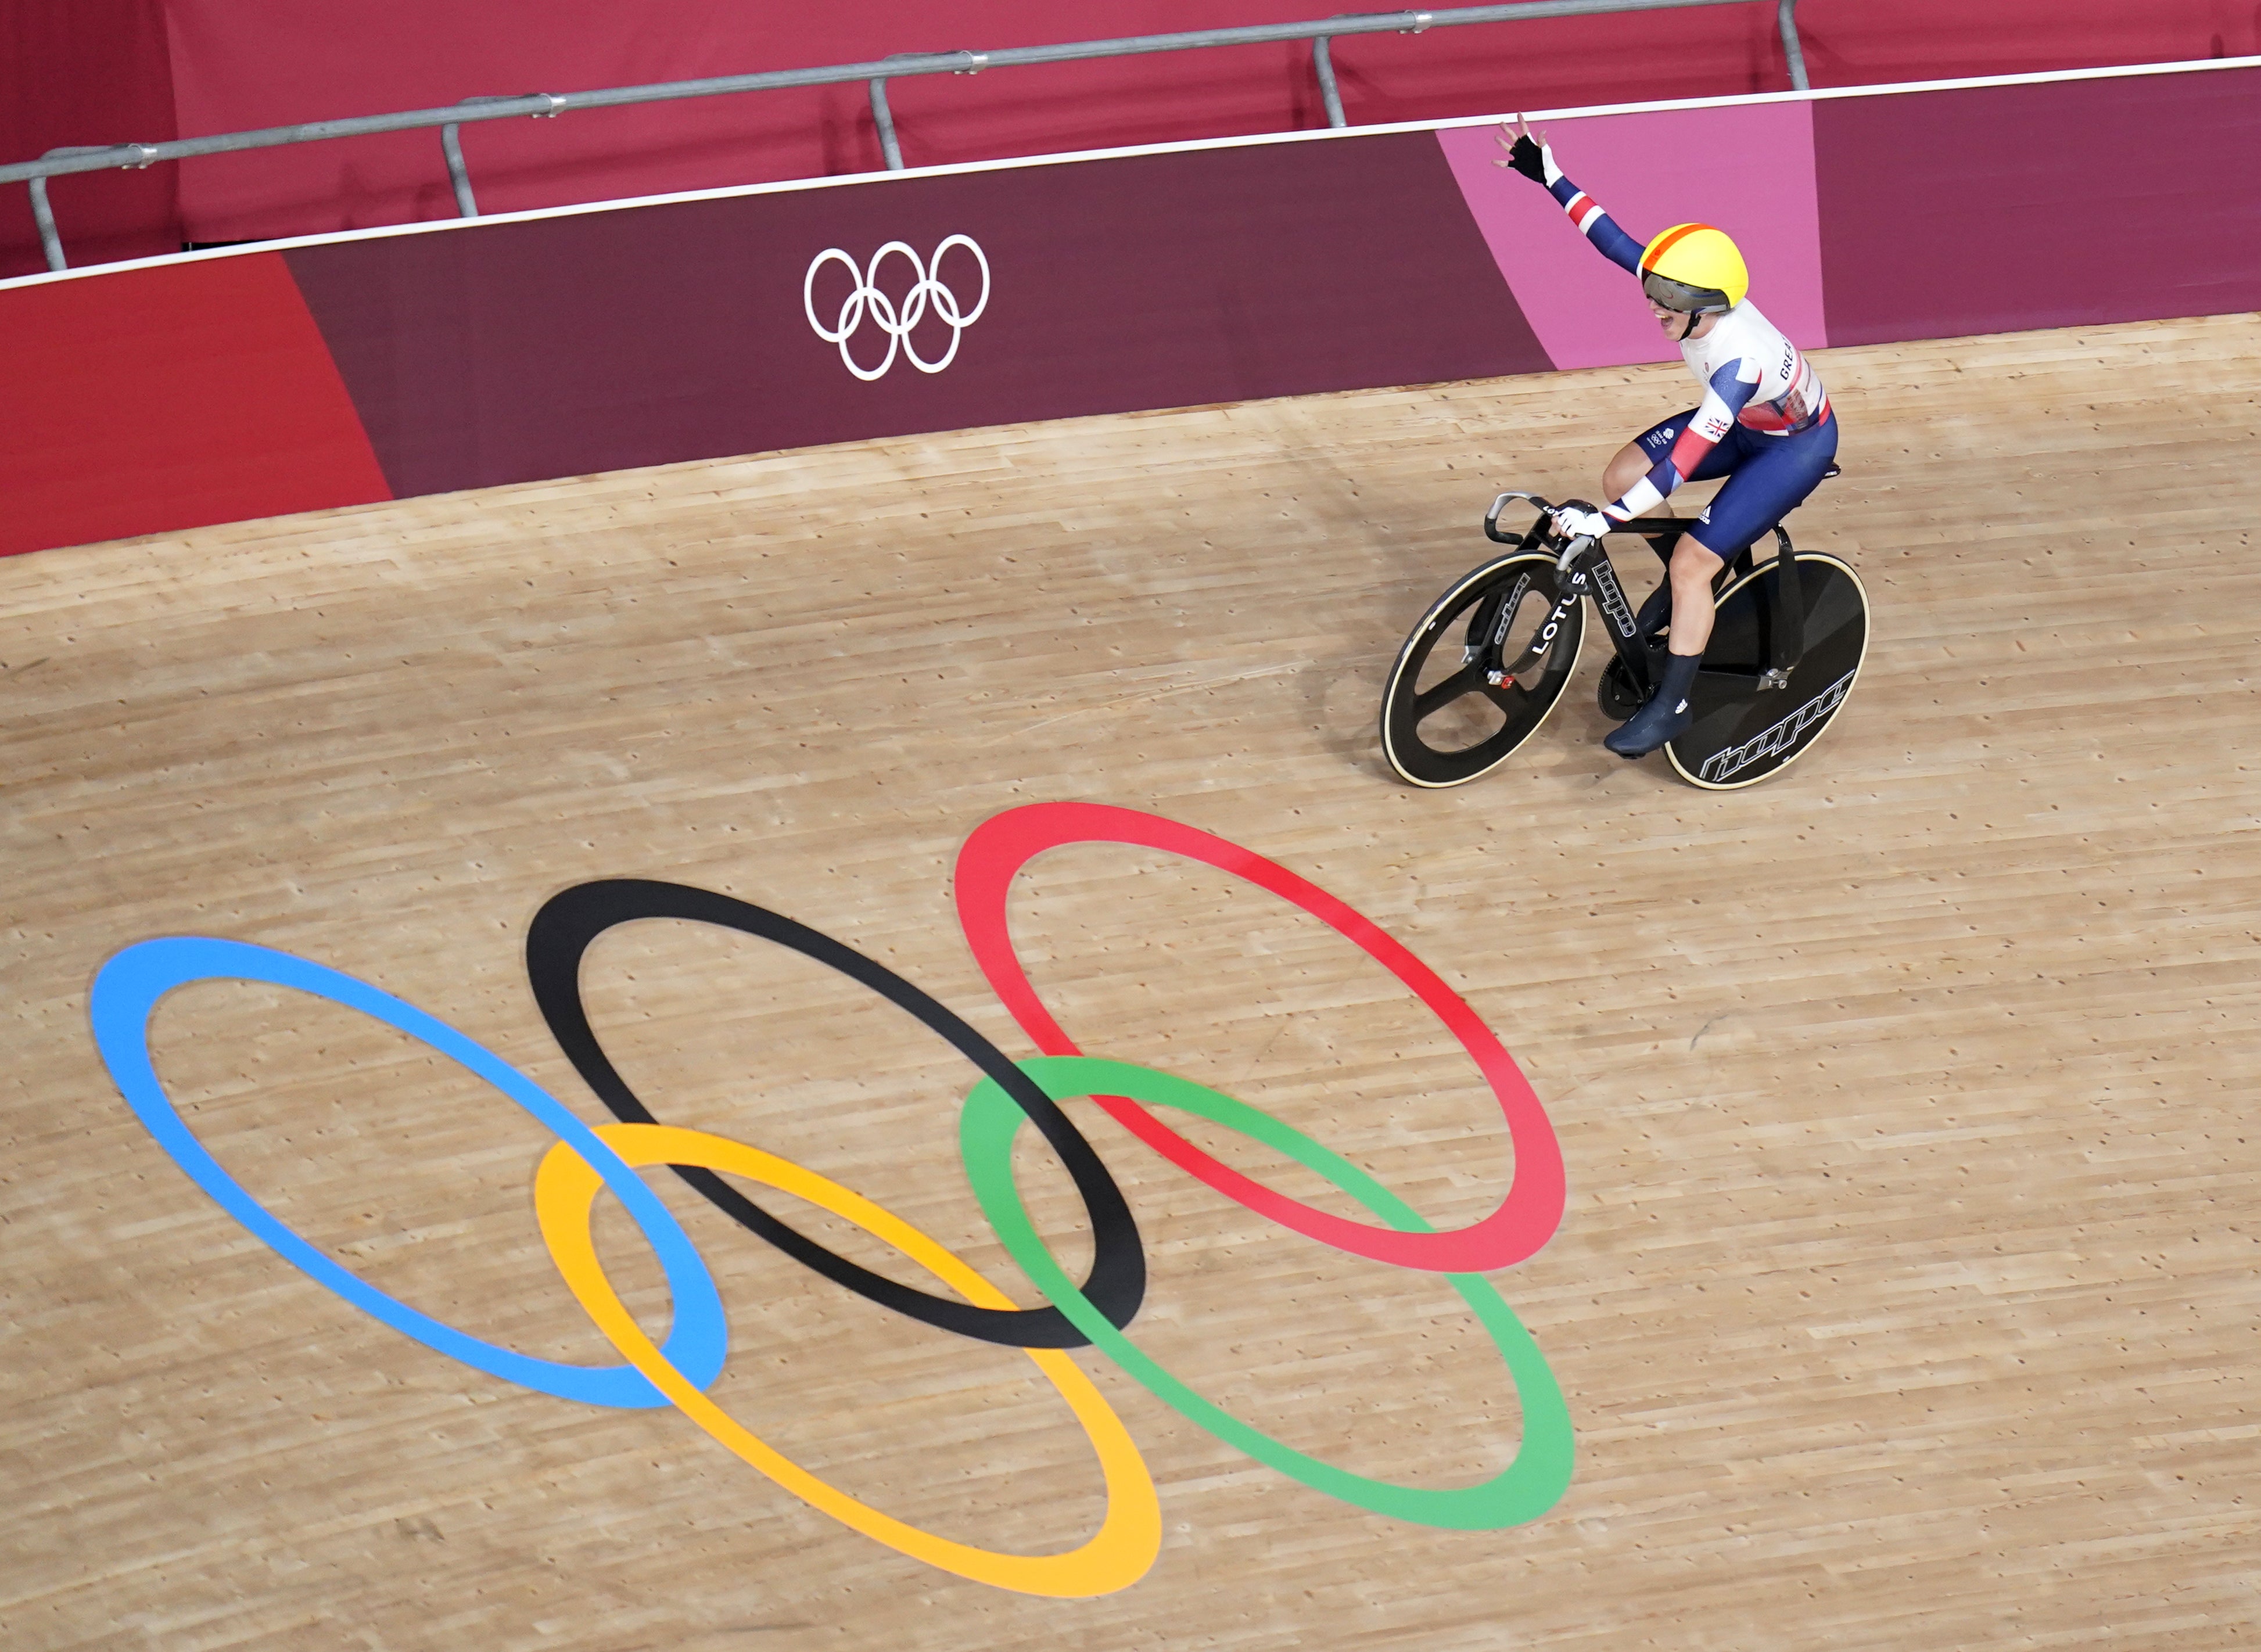 Laura Kenny has a chance to add to her Olympic medal haul (Danny Lawson/PA)